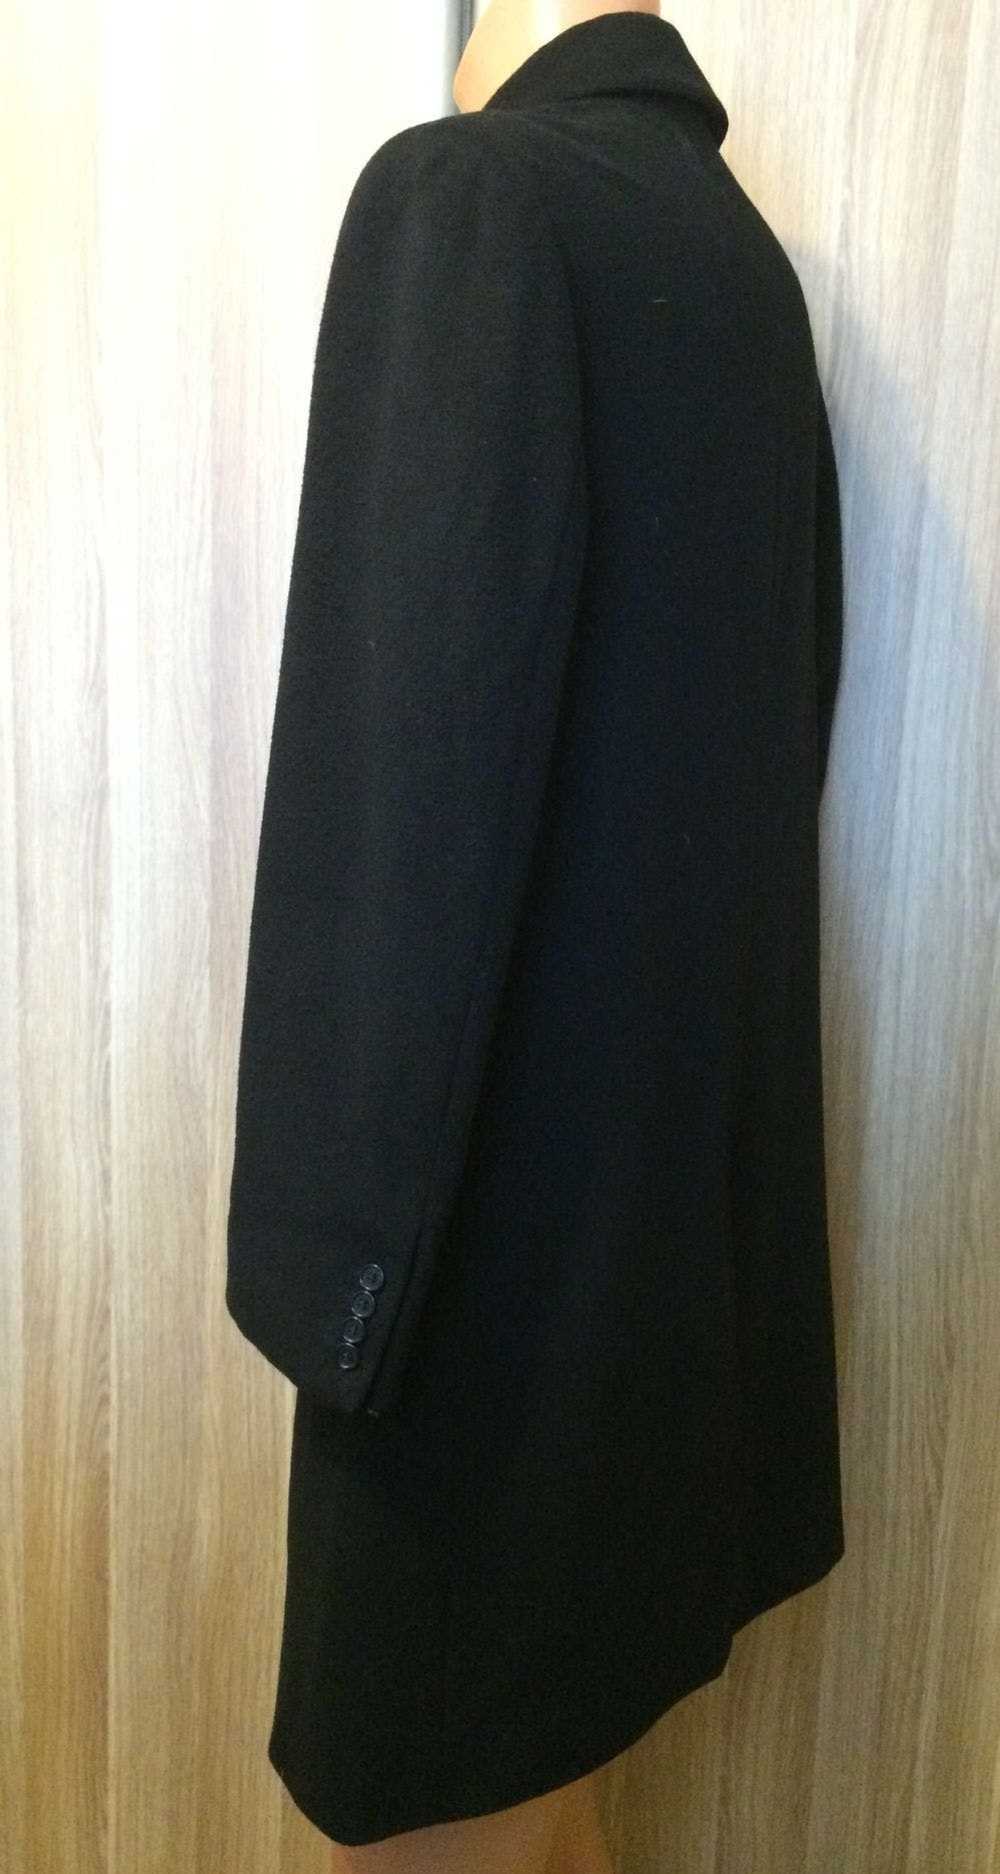 Other ANDREA VERSALI wool and cashmere coat size L - image 3